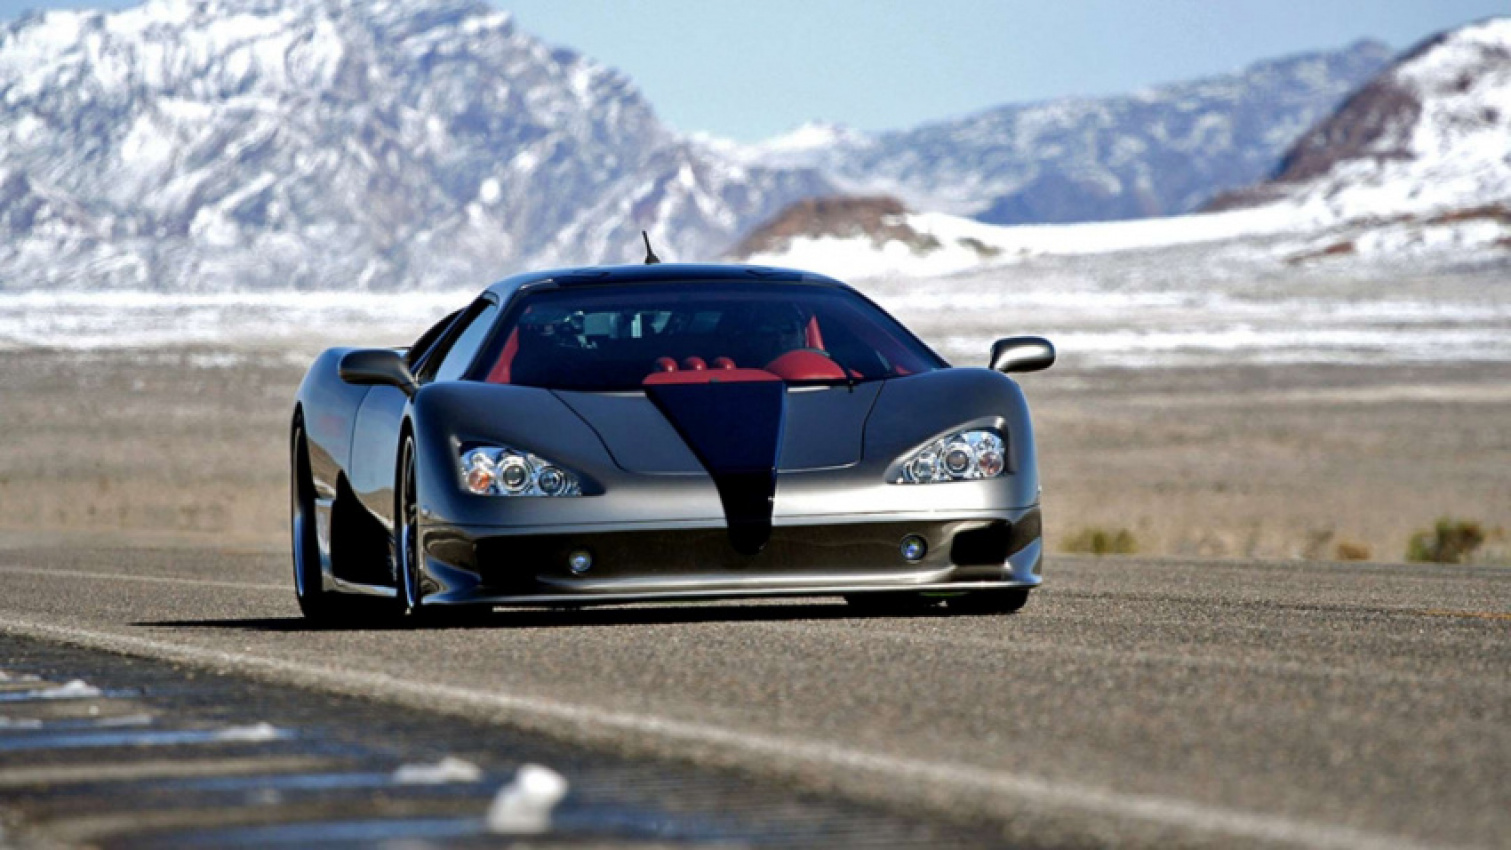 autos, cars, hypercar, chevrolet, corvette, dodge, ford gt, hennessey, list, panoz, saleen, supercar, vector, viper, the 10 best american supercars ever made